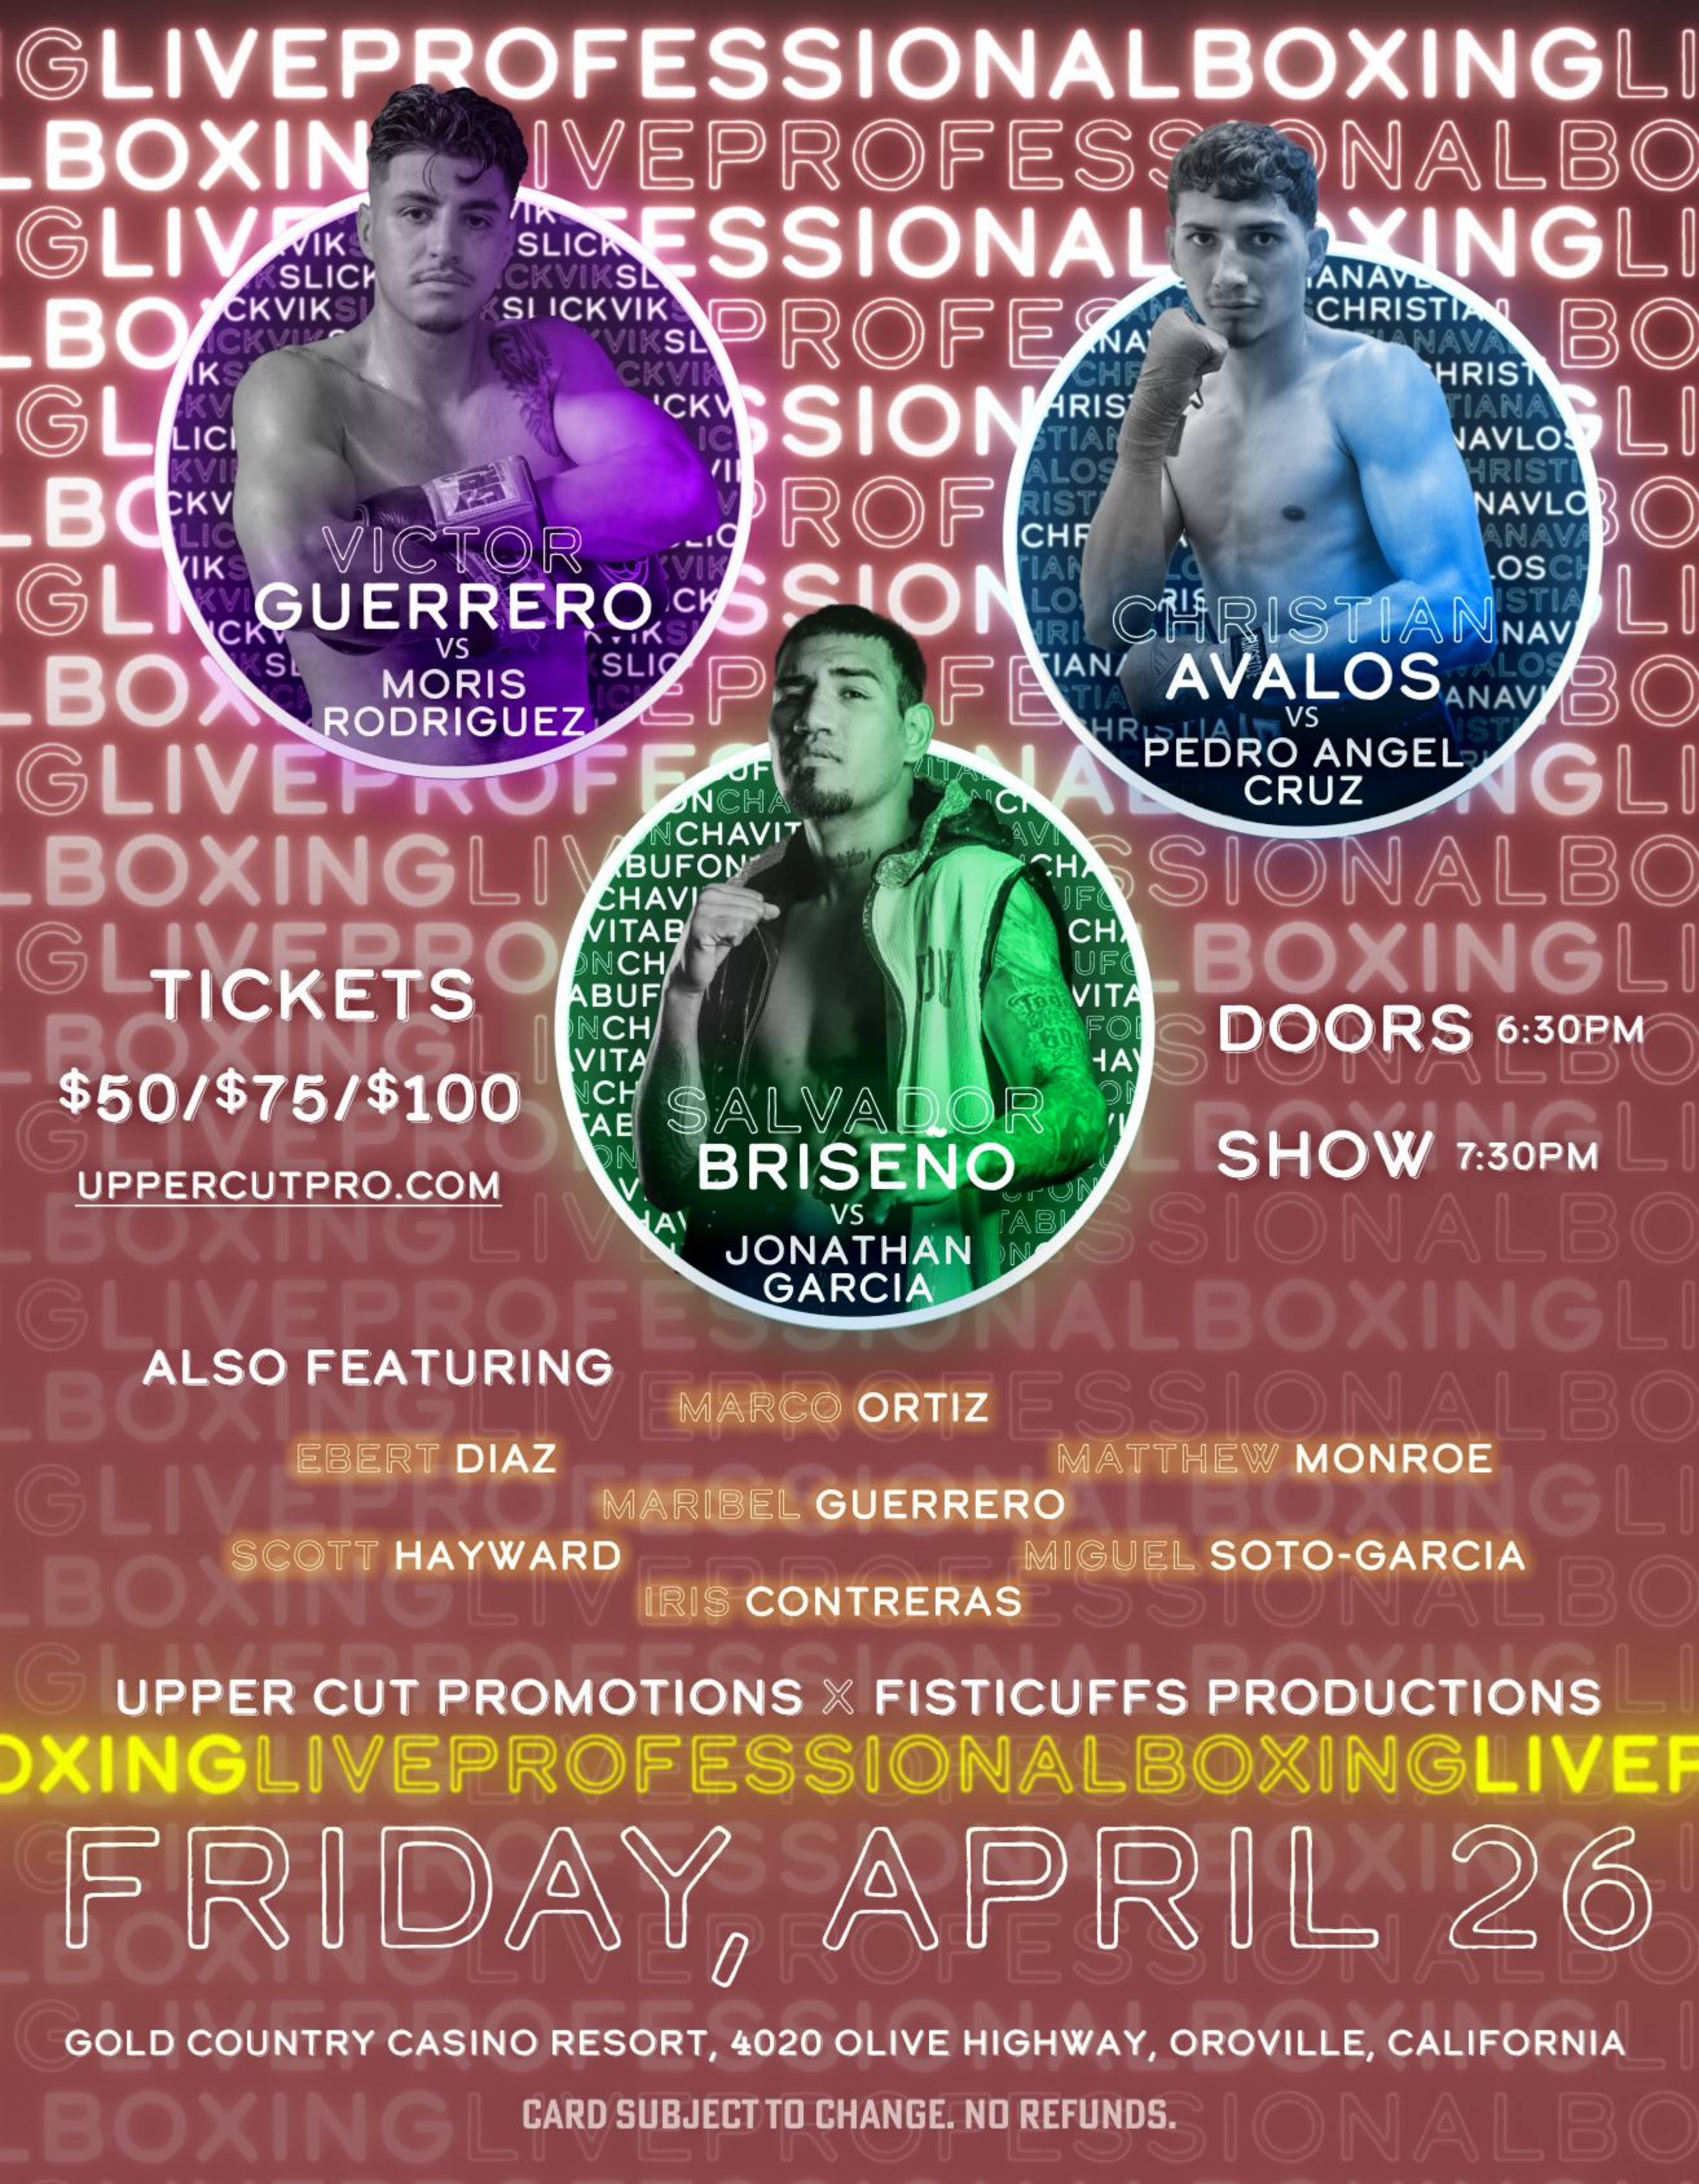 Live Professional Boxing on April 26th